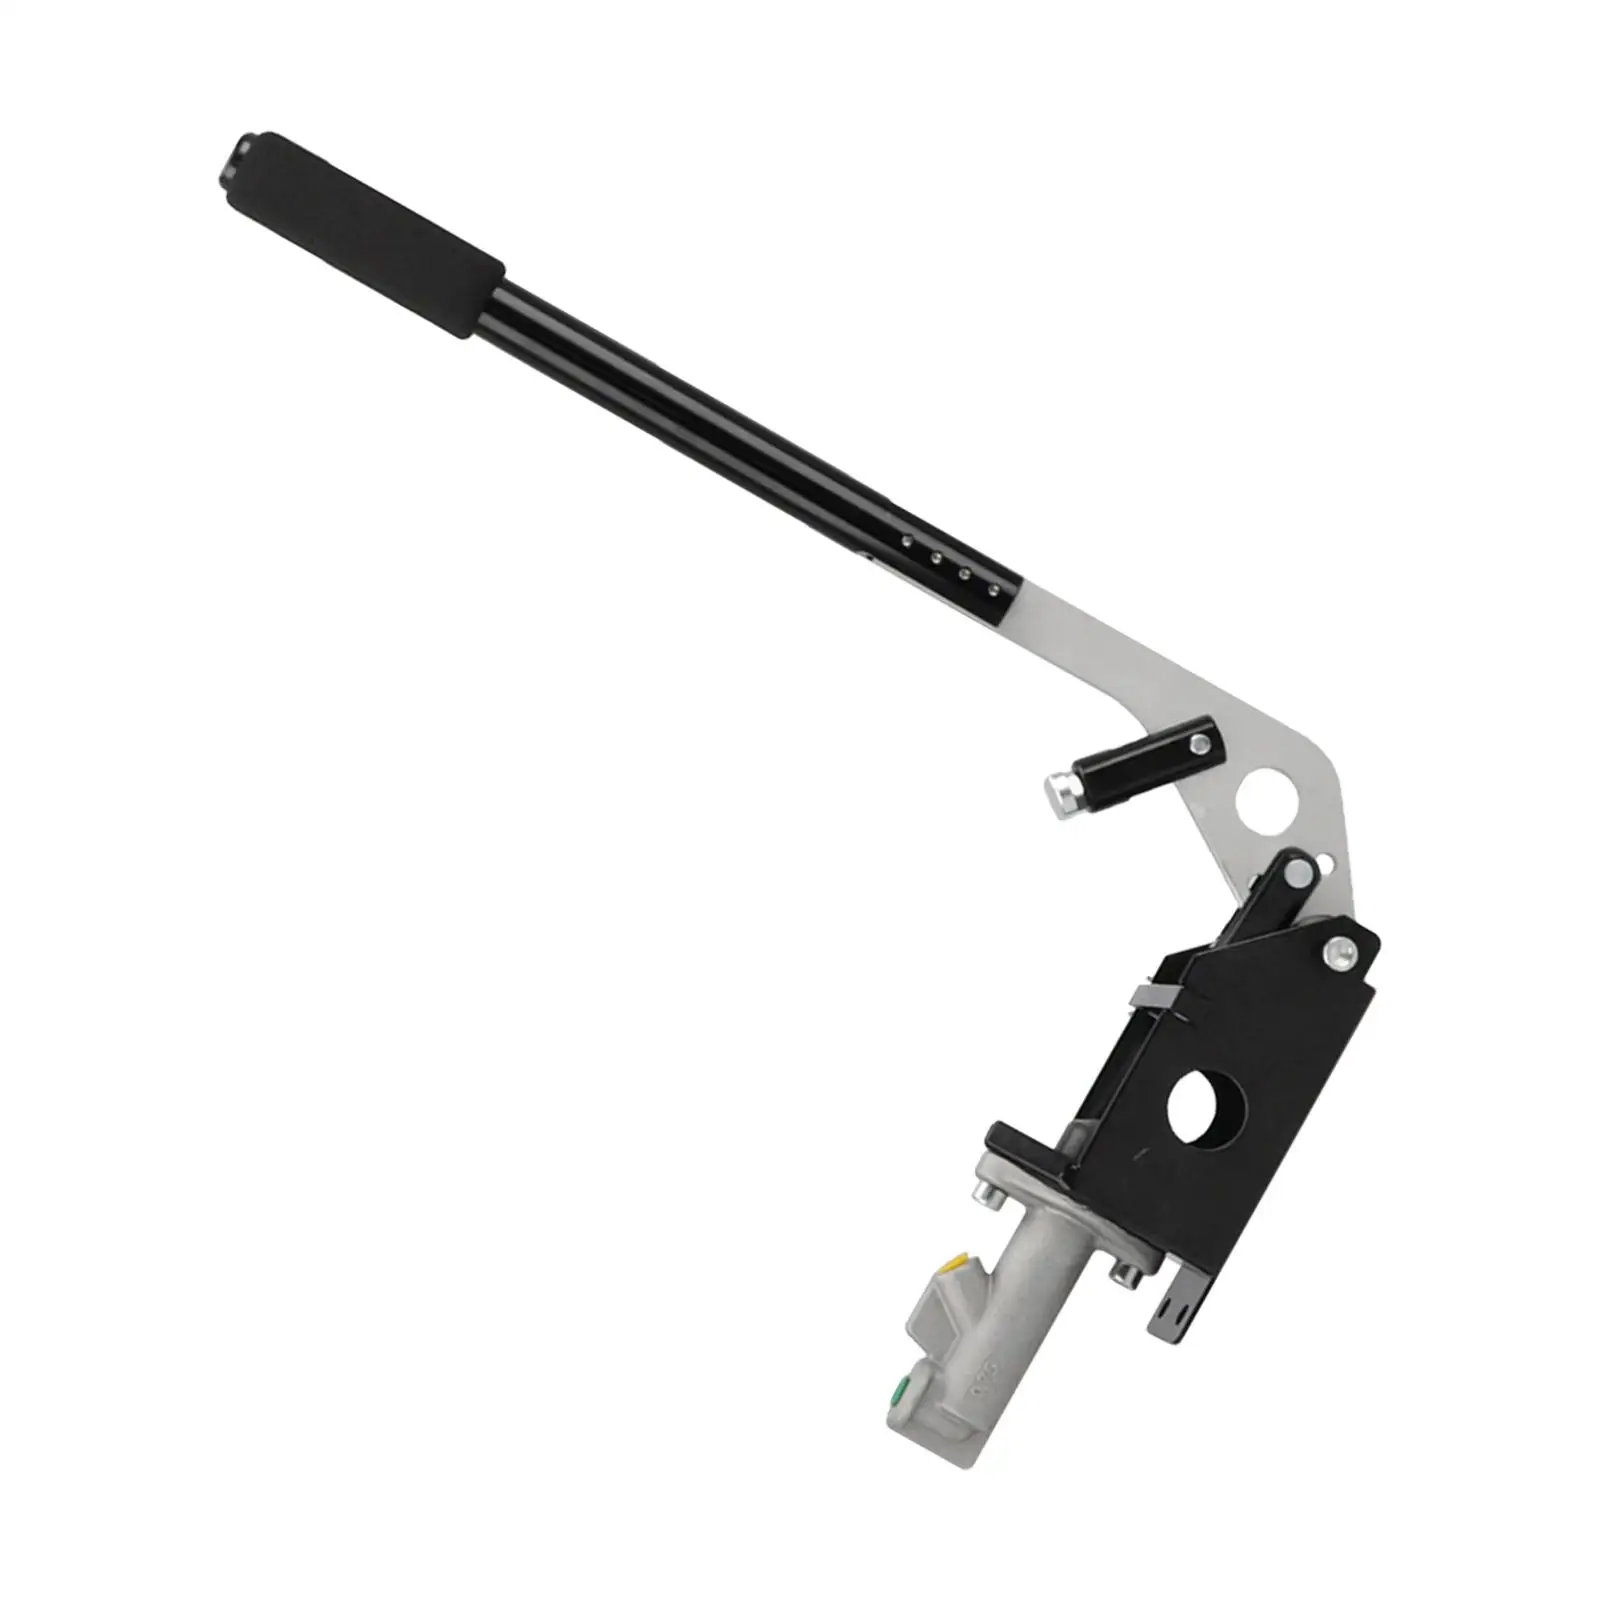 

Universal Hydraulic Handbrake, Vertical Position, Anti-Slip Long Lever Handle, for , Track, Racing, Parking, Racer Competition